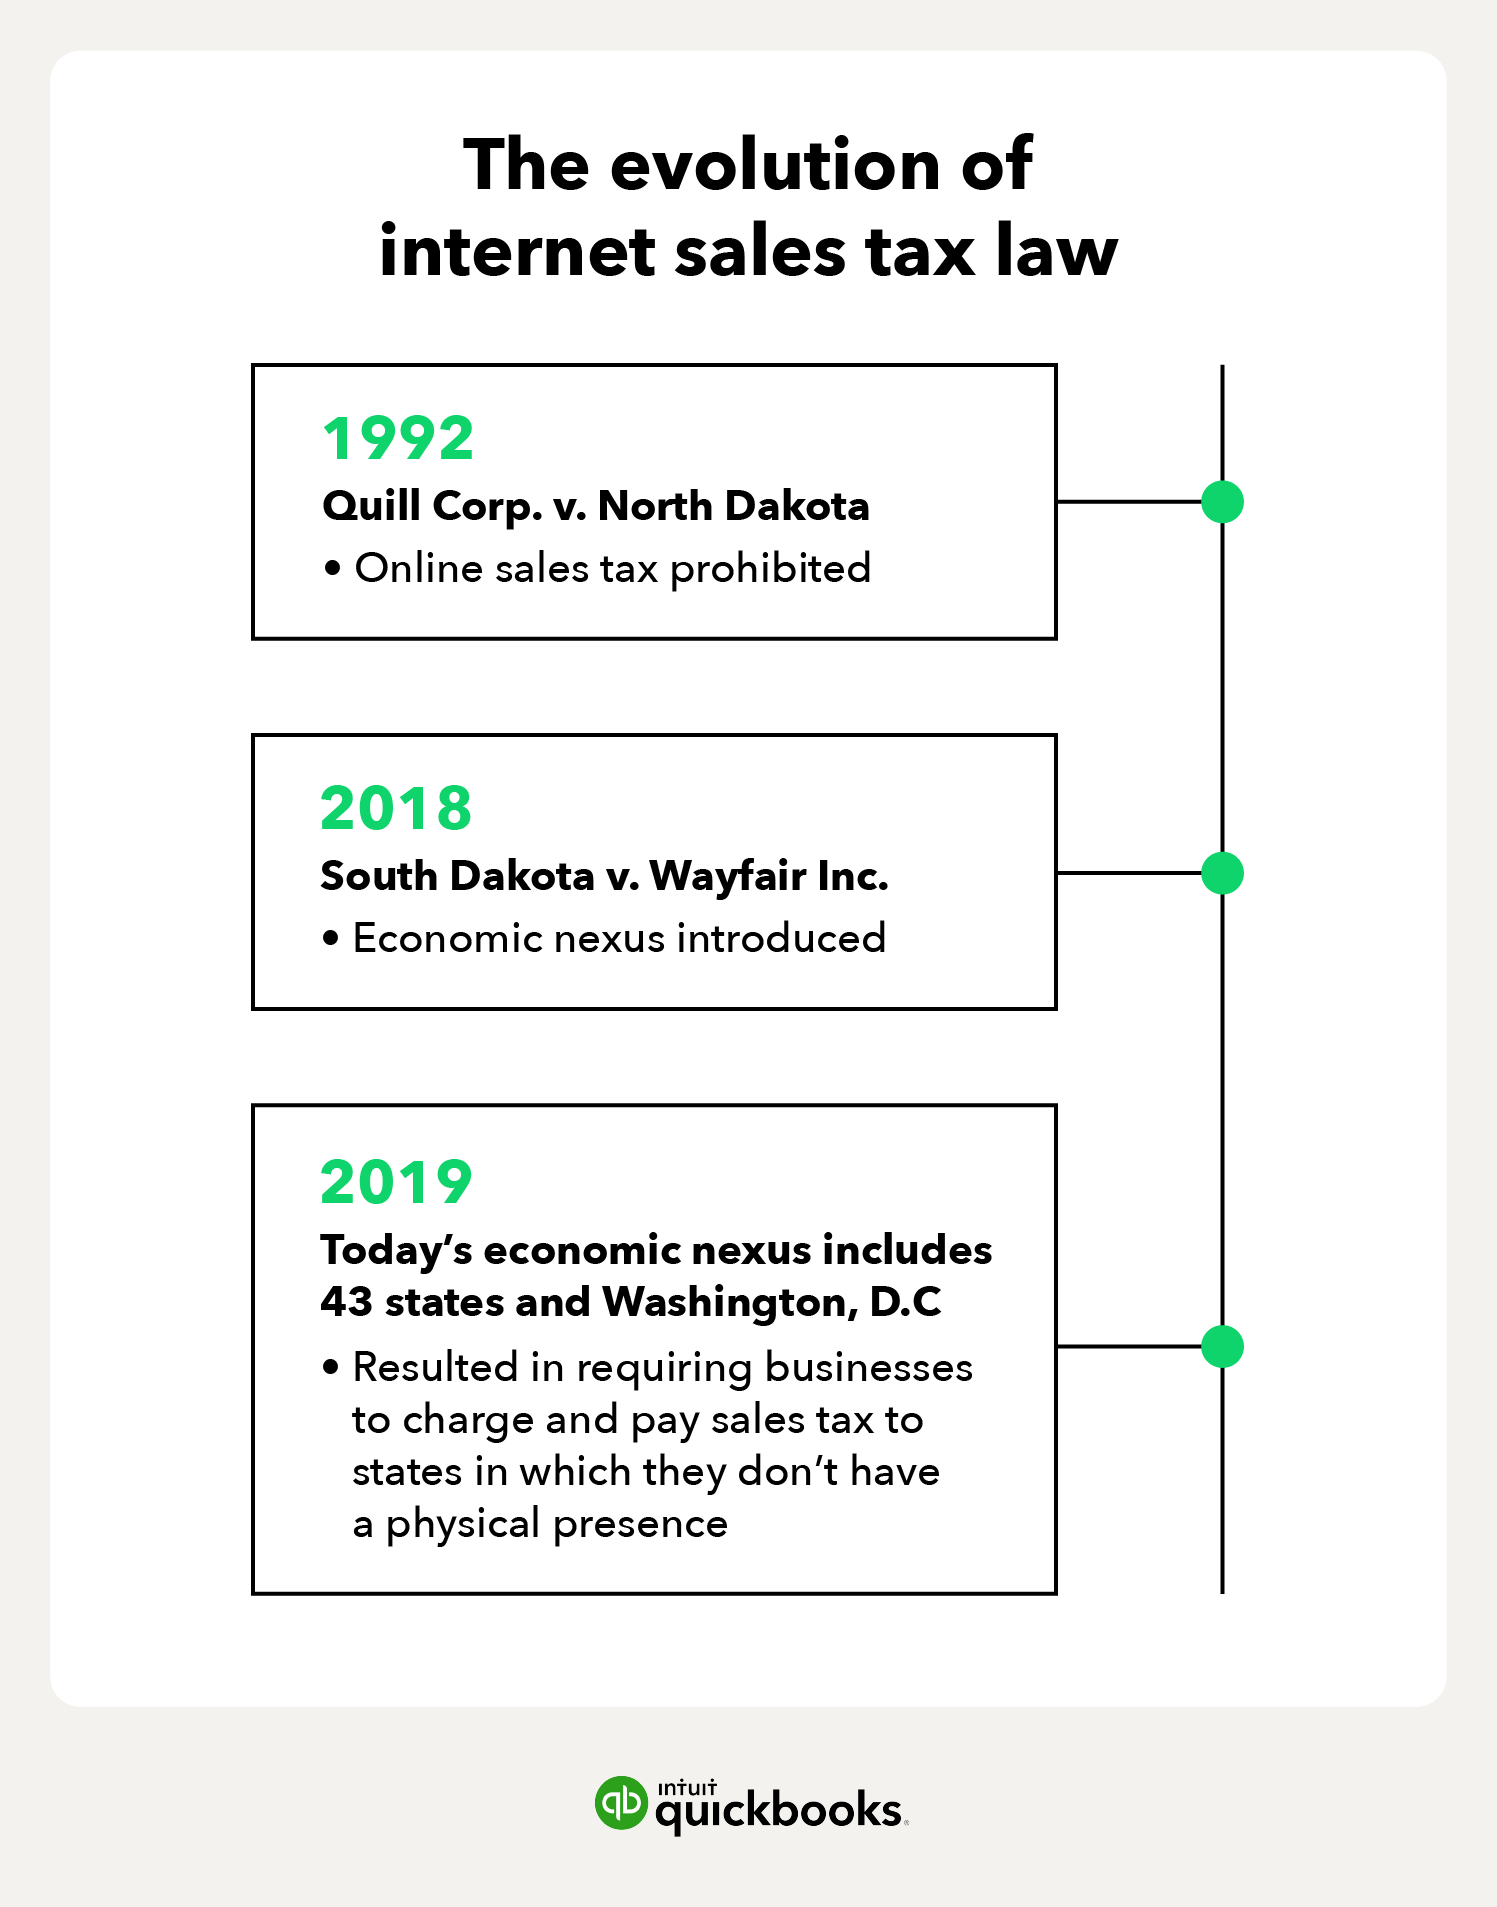 The evolution of internet sales tax law.